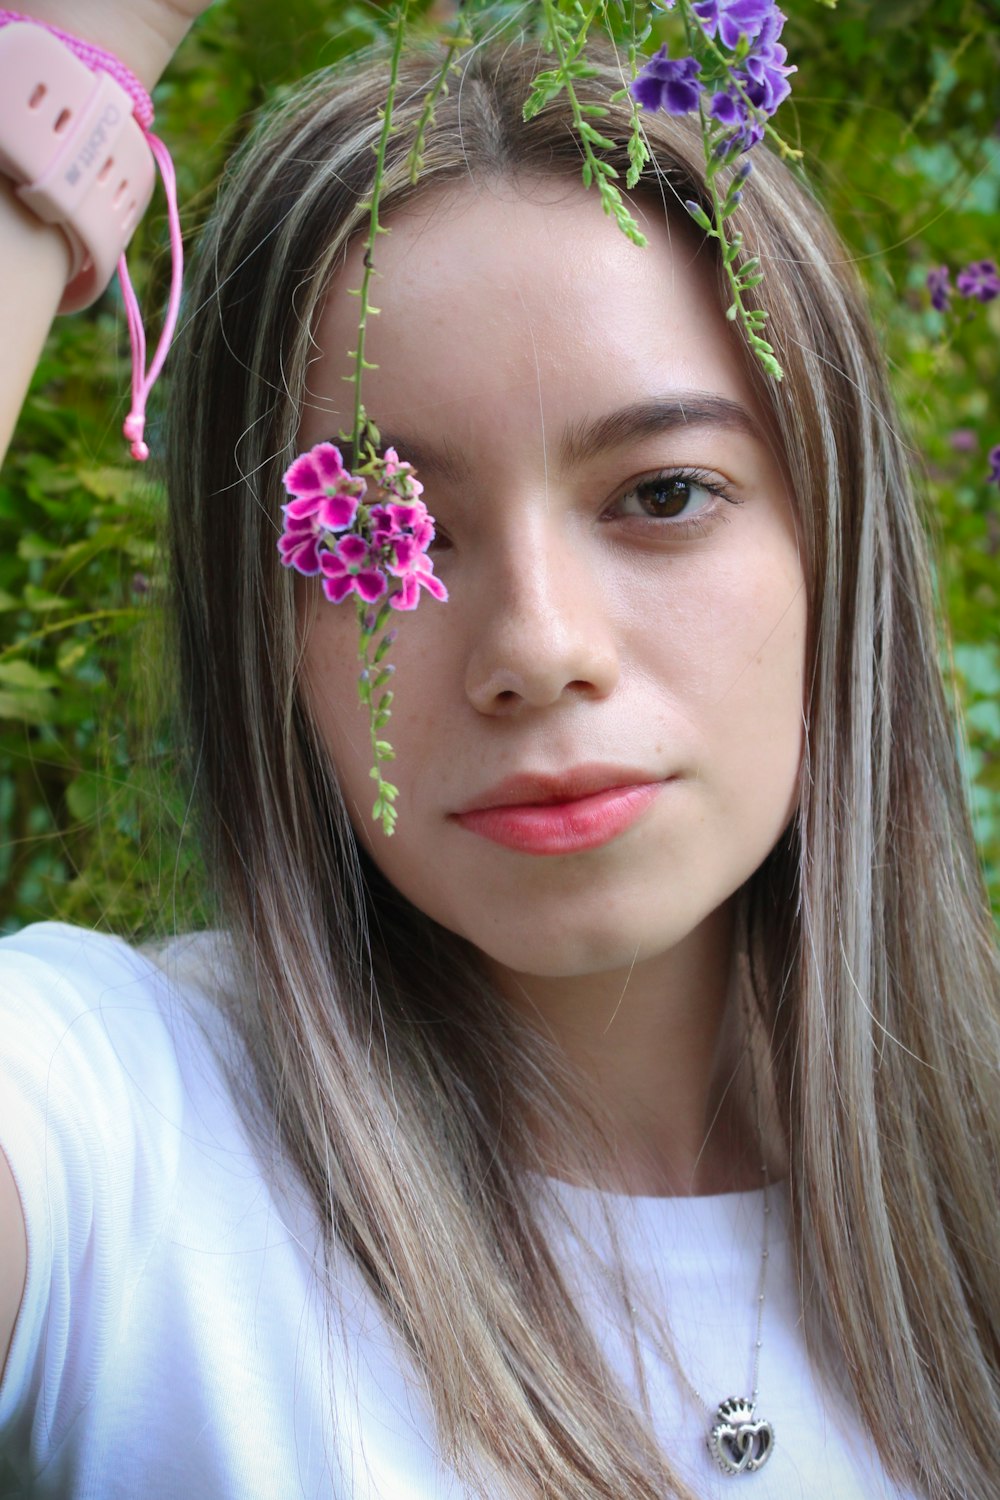 a girl with long hair and flowers in her hair